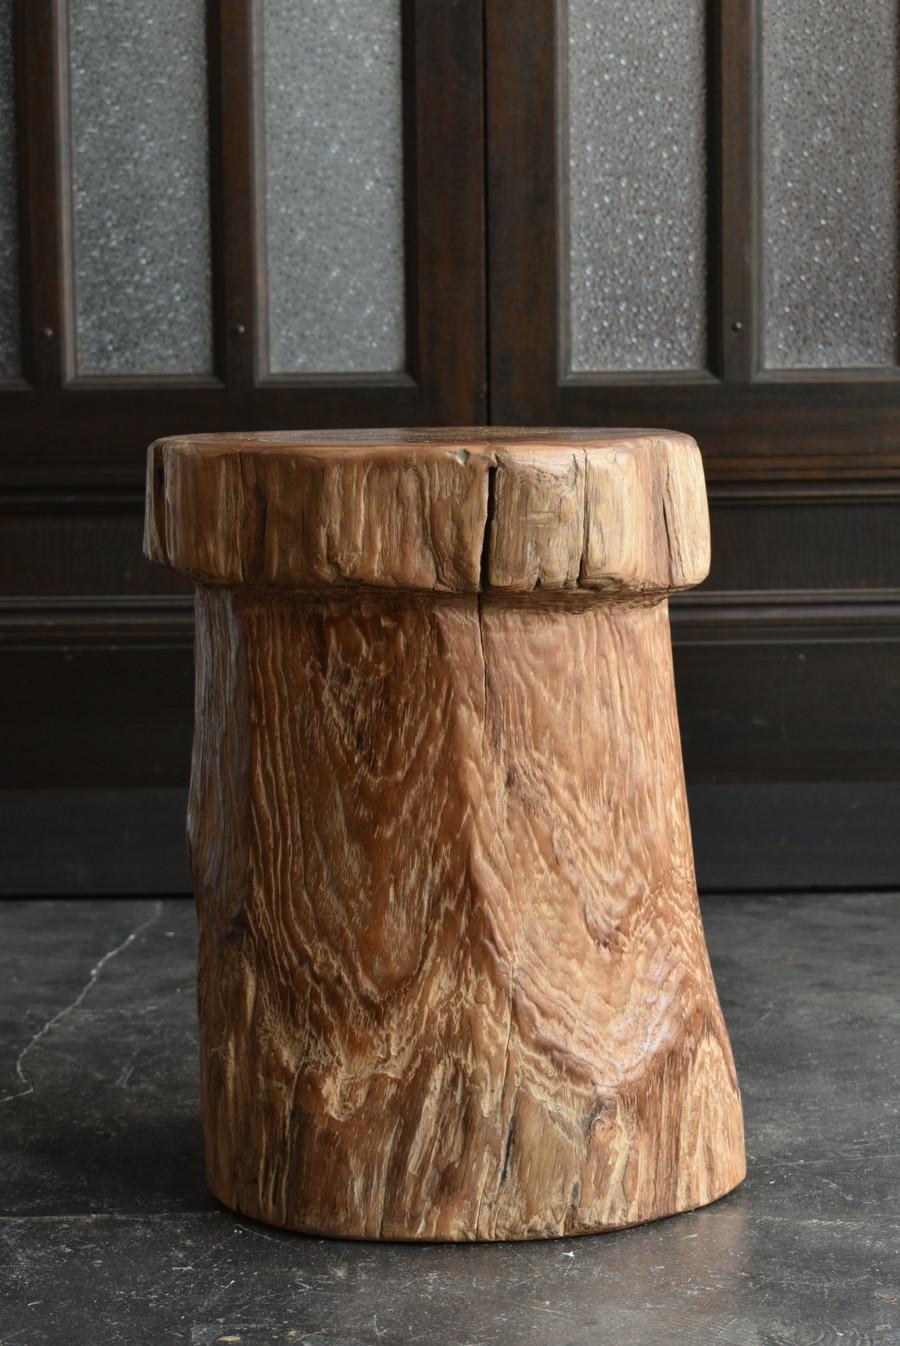 Other Indonesian Mushroom-Shaped Old Stool/Primitive Design/Early 20th Century/Stock B